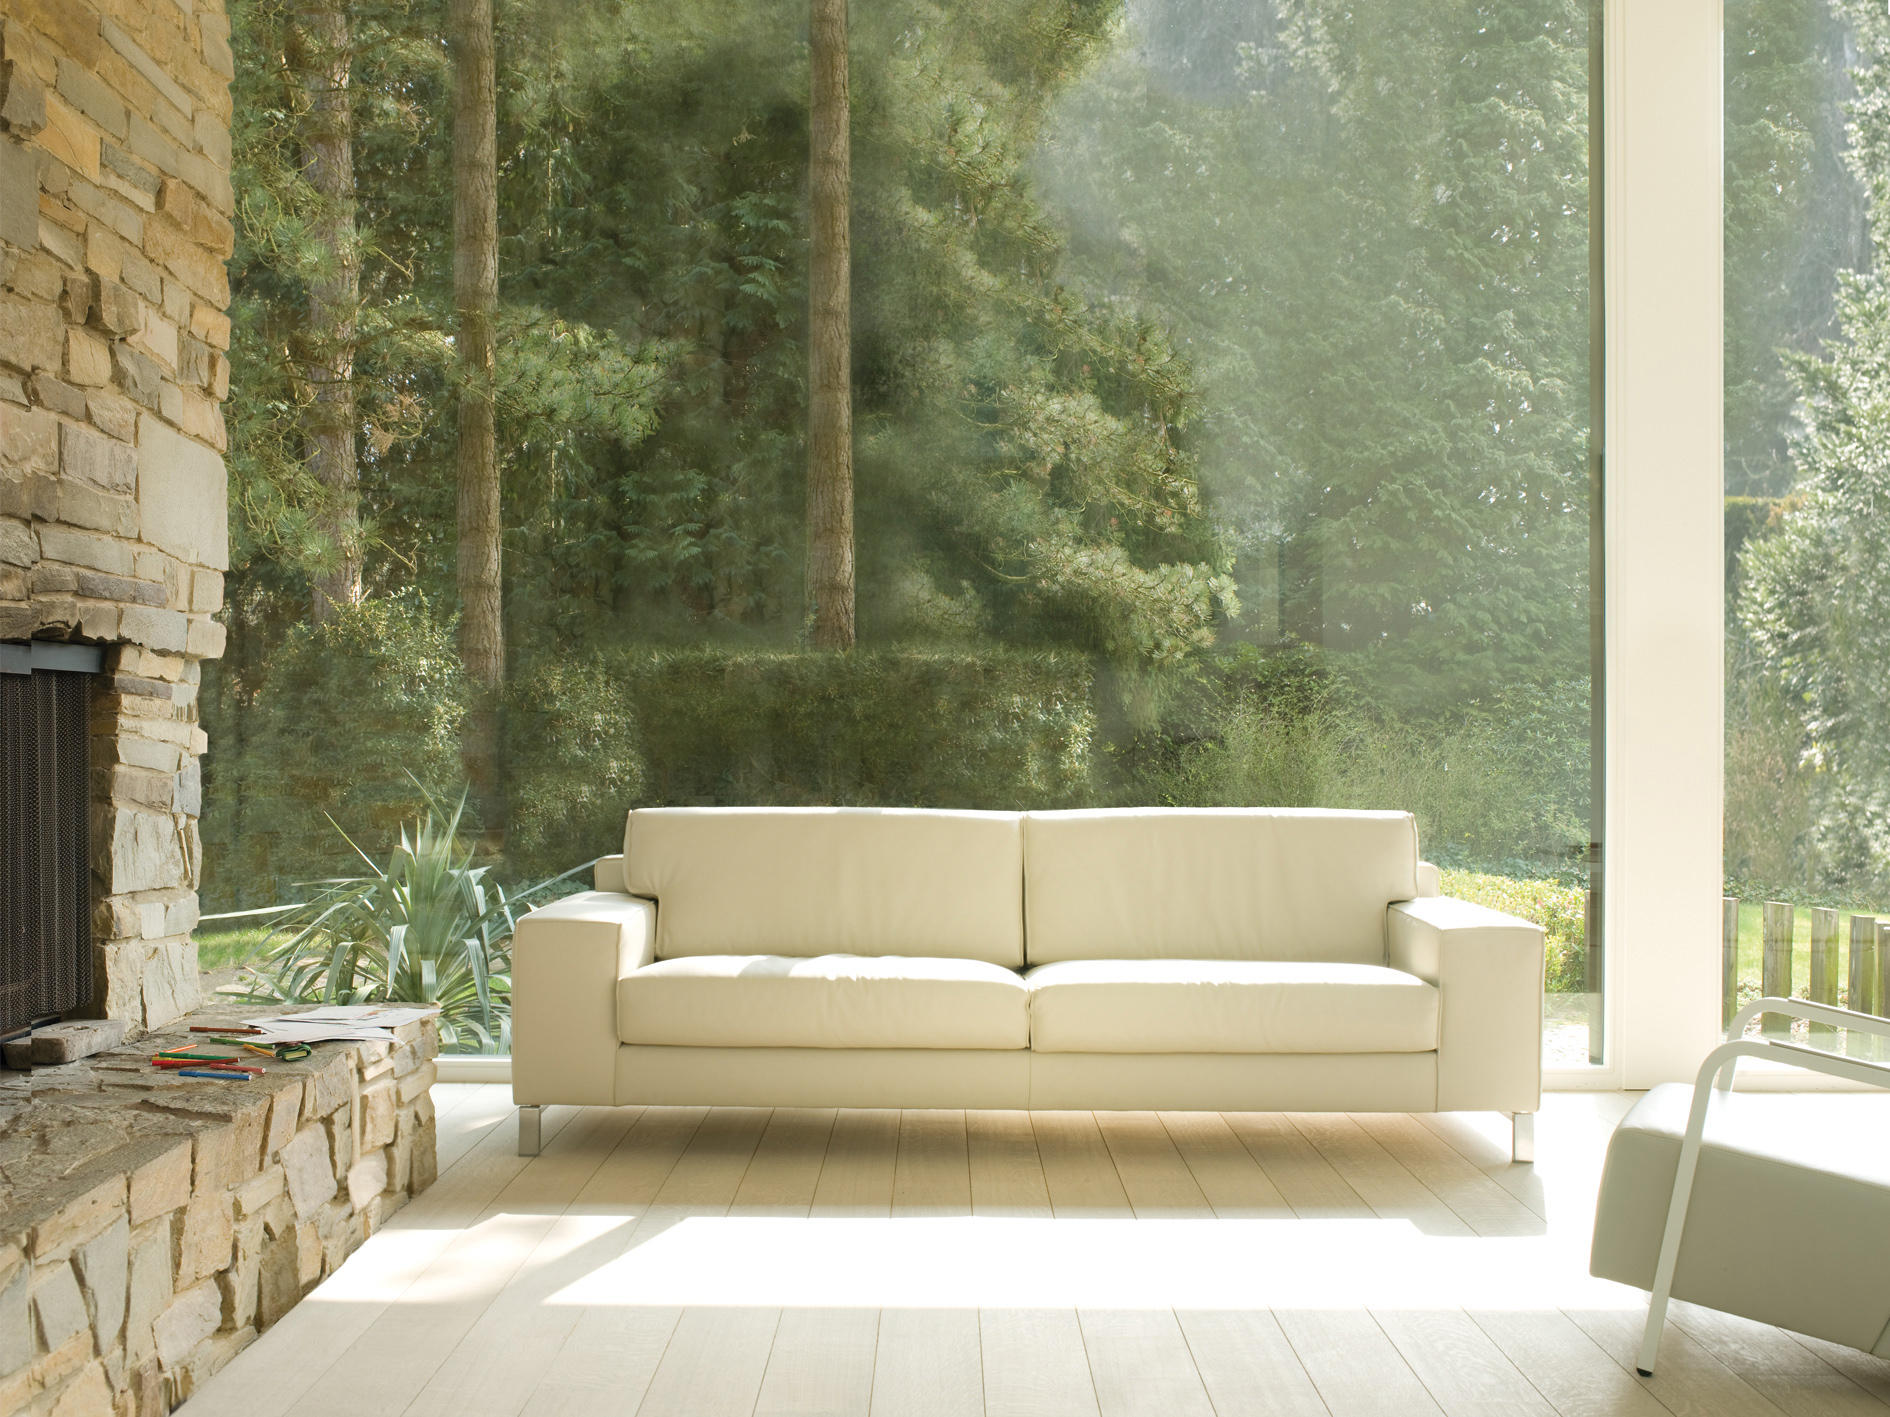 Sydney Sofas From Durlet Architonic